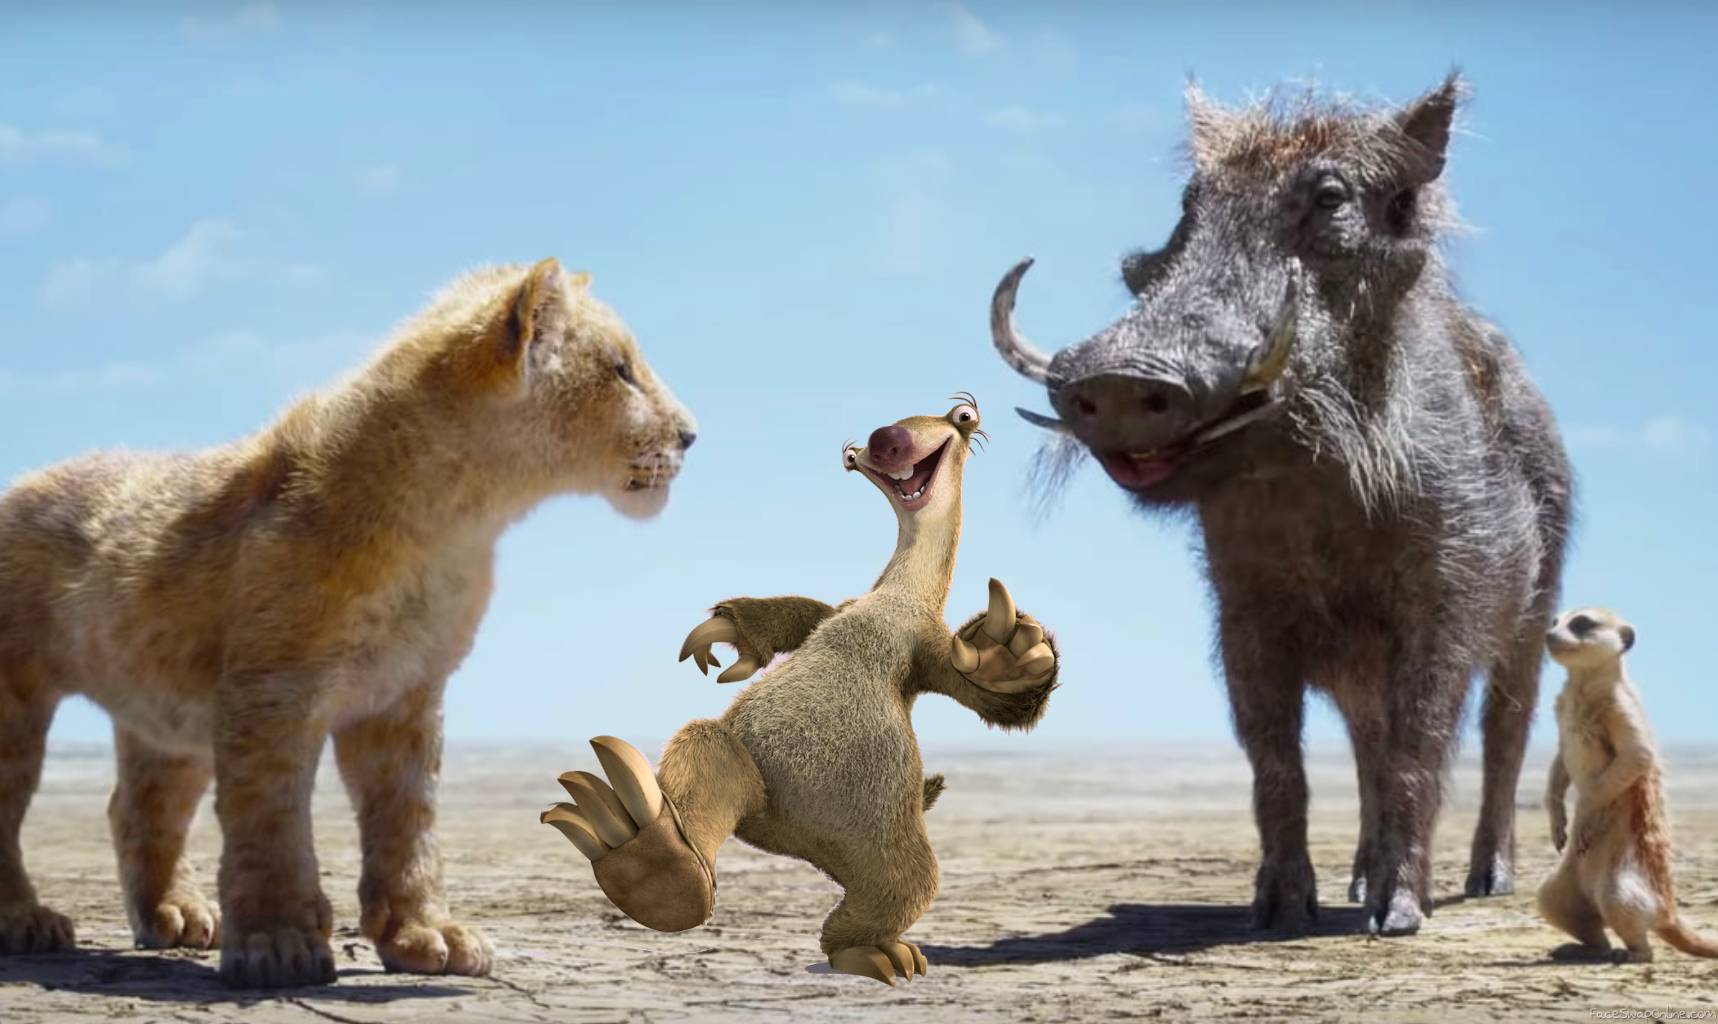 If Ice Age was mixed in Lion King universe